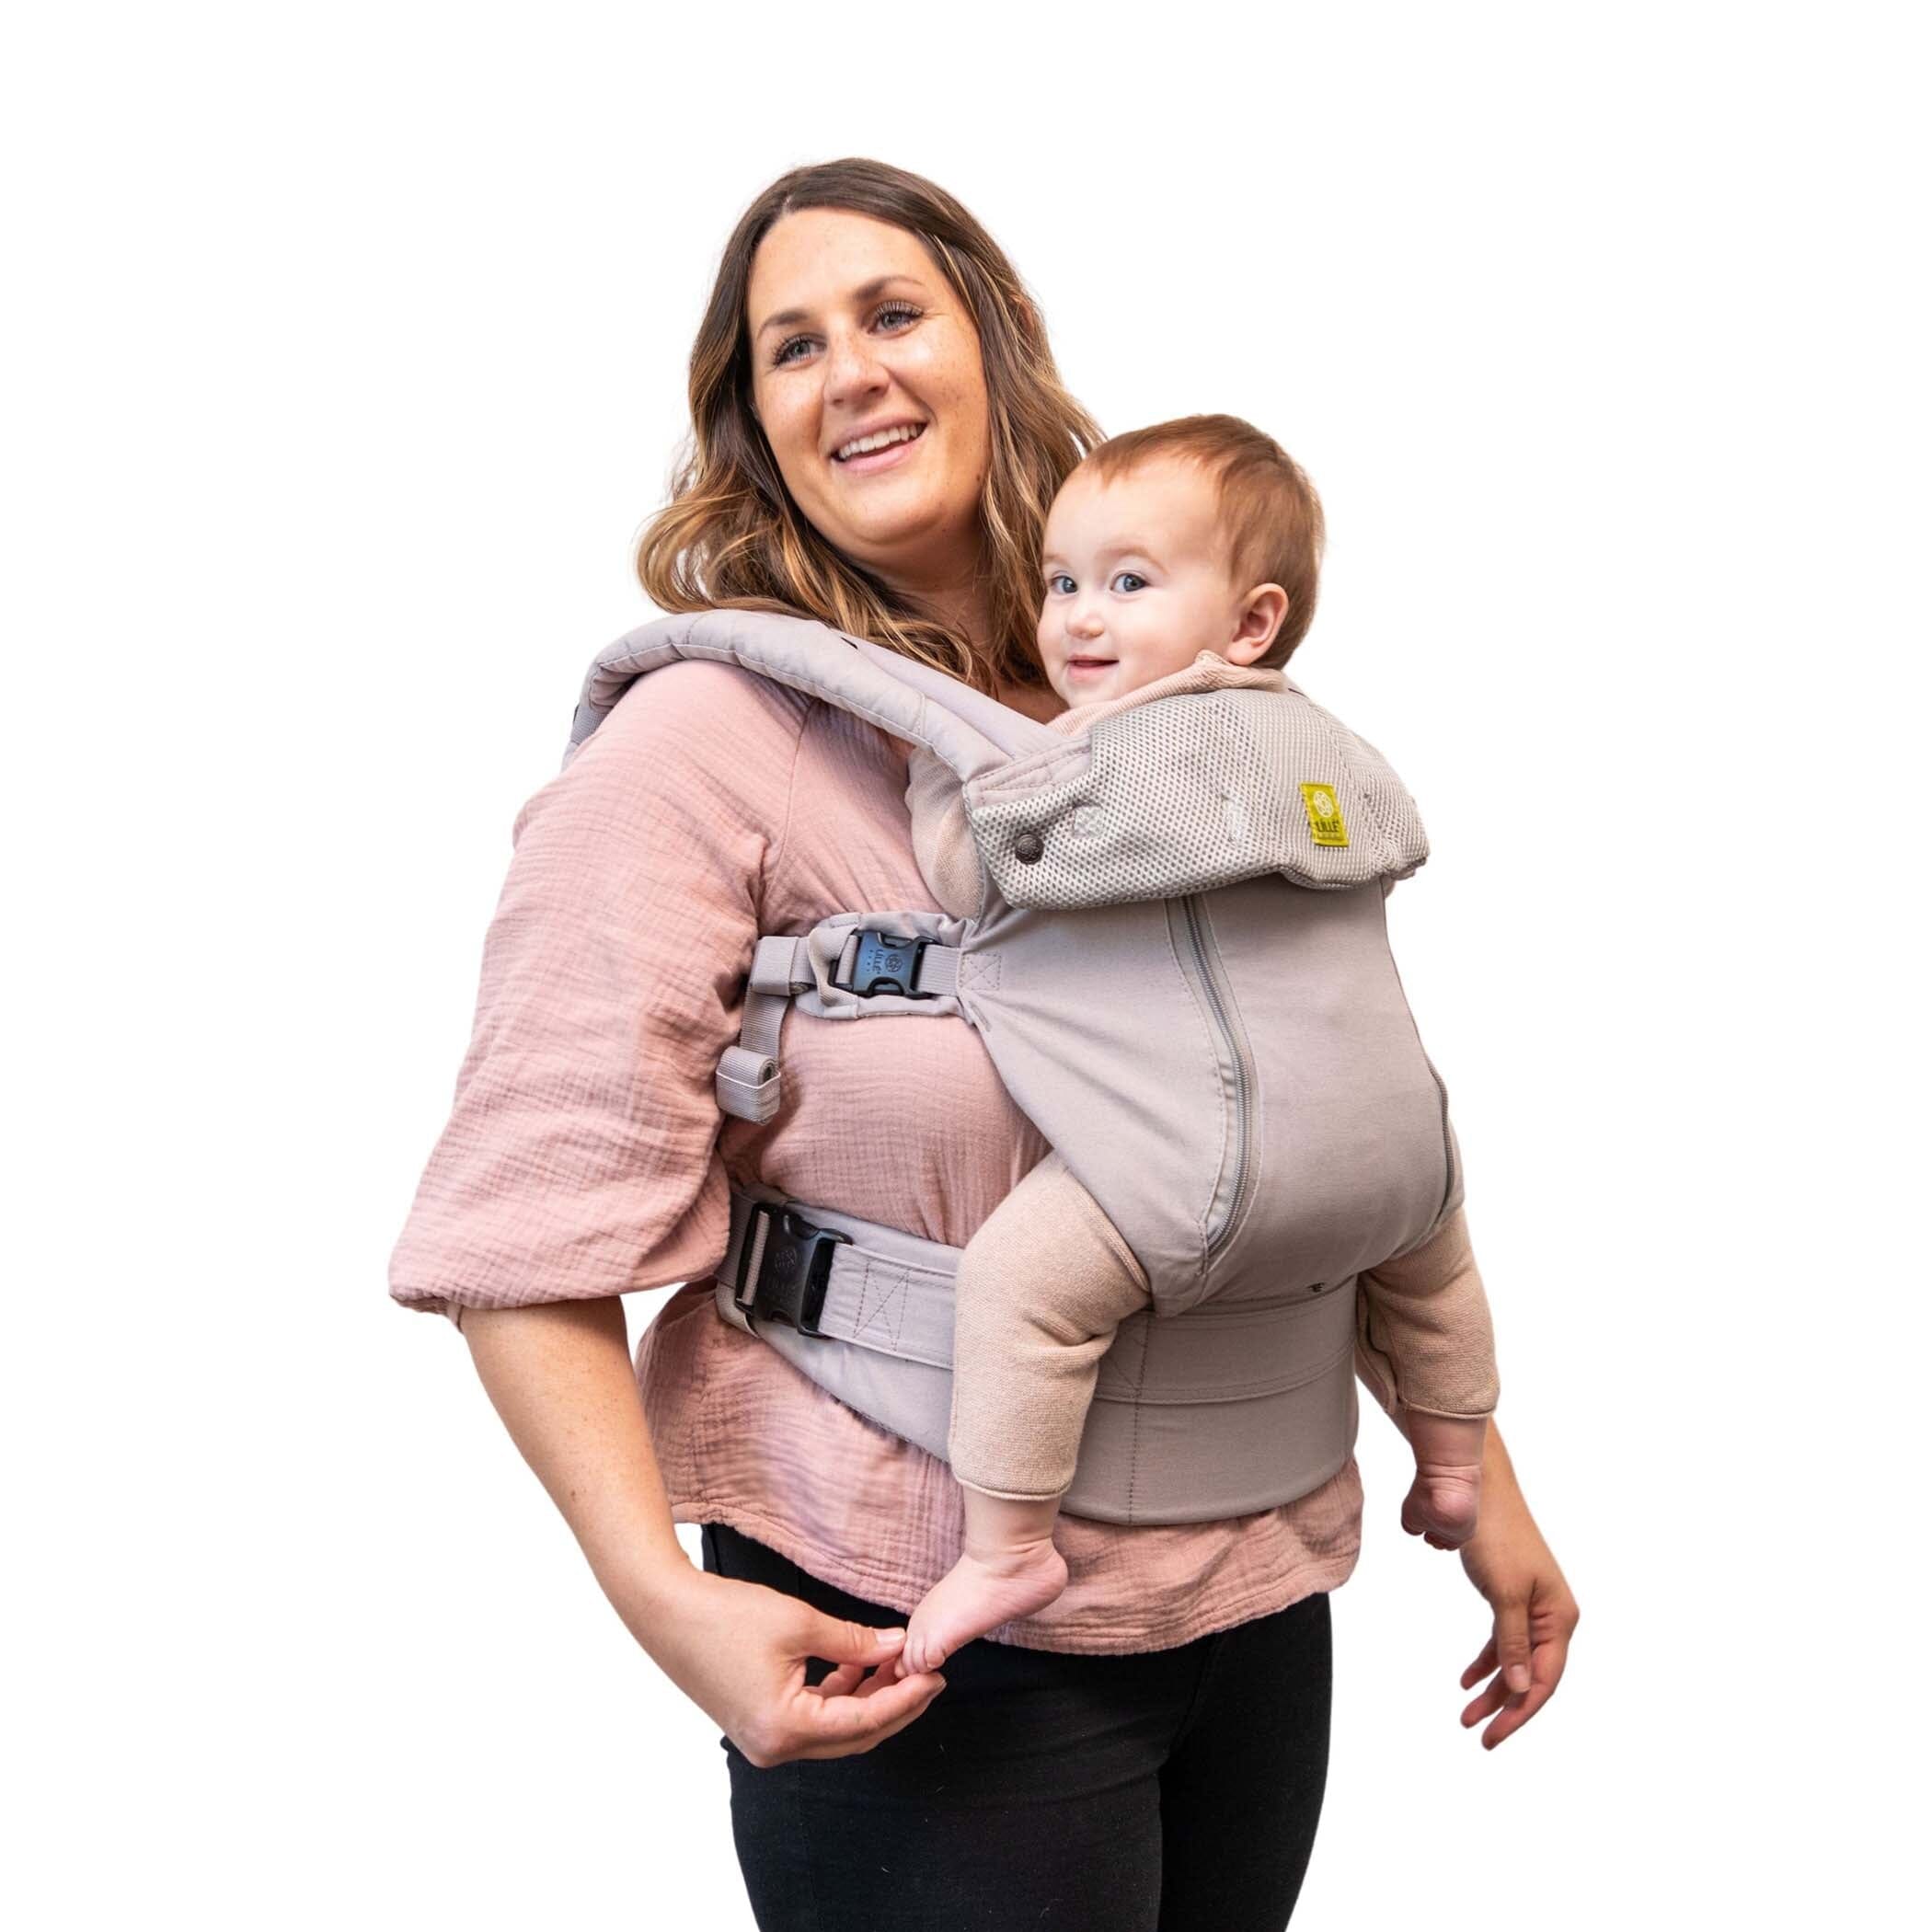 Plus size mom wearing 6 month old infant in inward seated ergonomic position